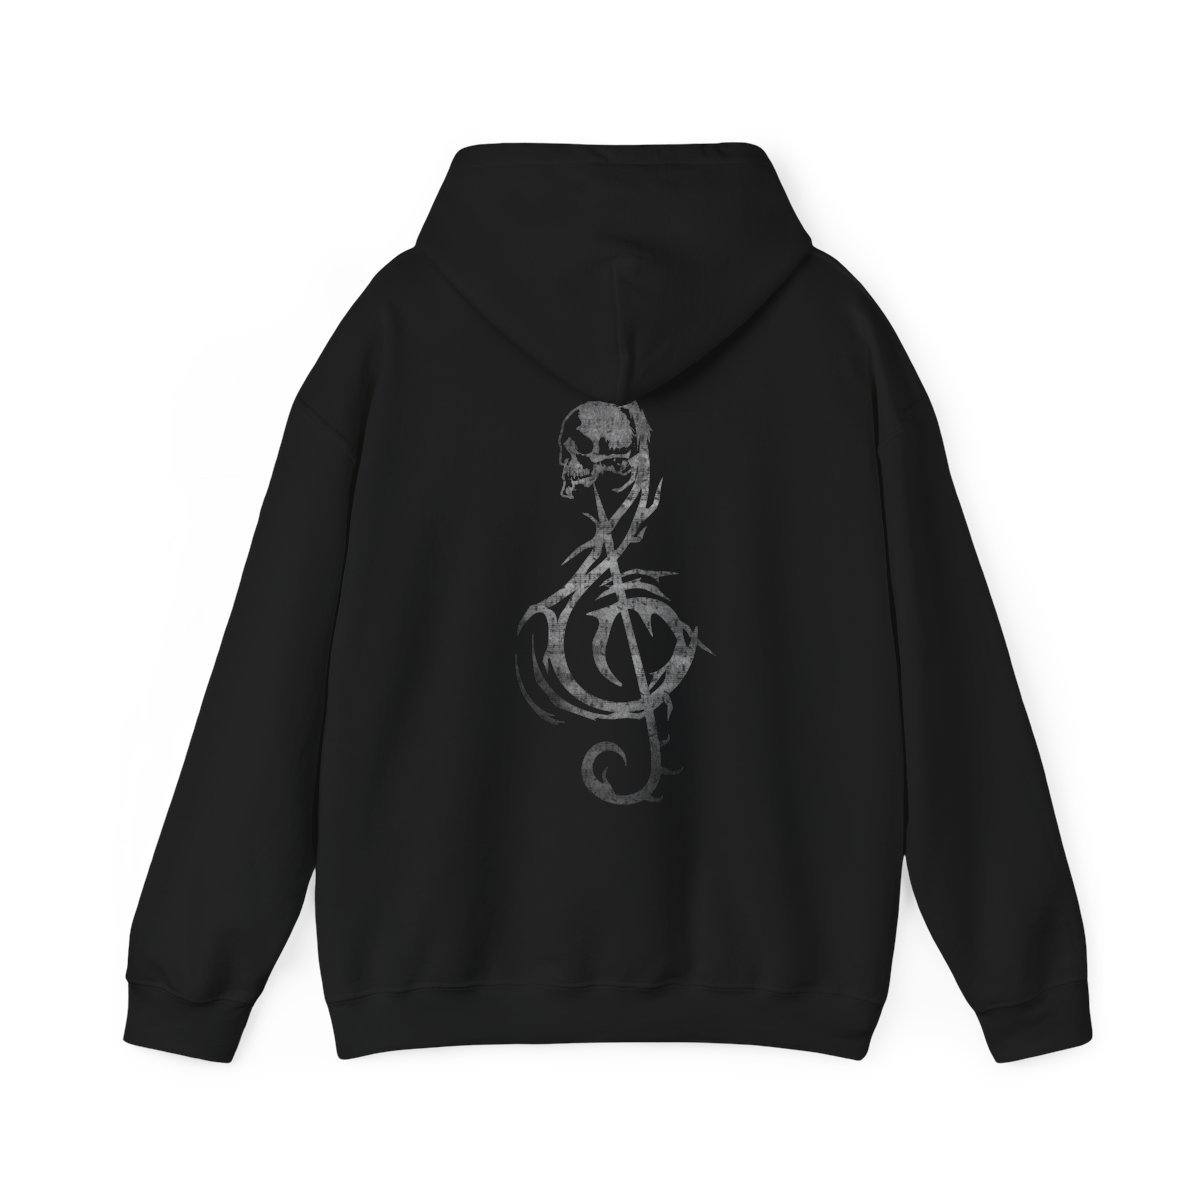 Frost Like Ashes – Melody Black Pullover Hooded Sweatshirt (2-Sided)